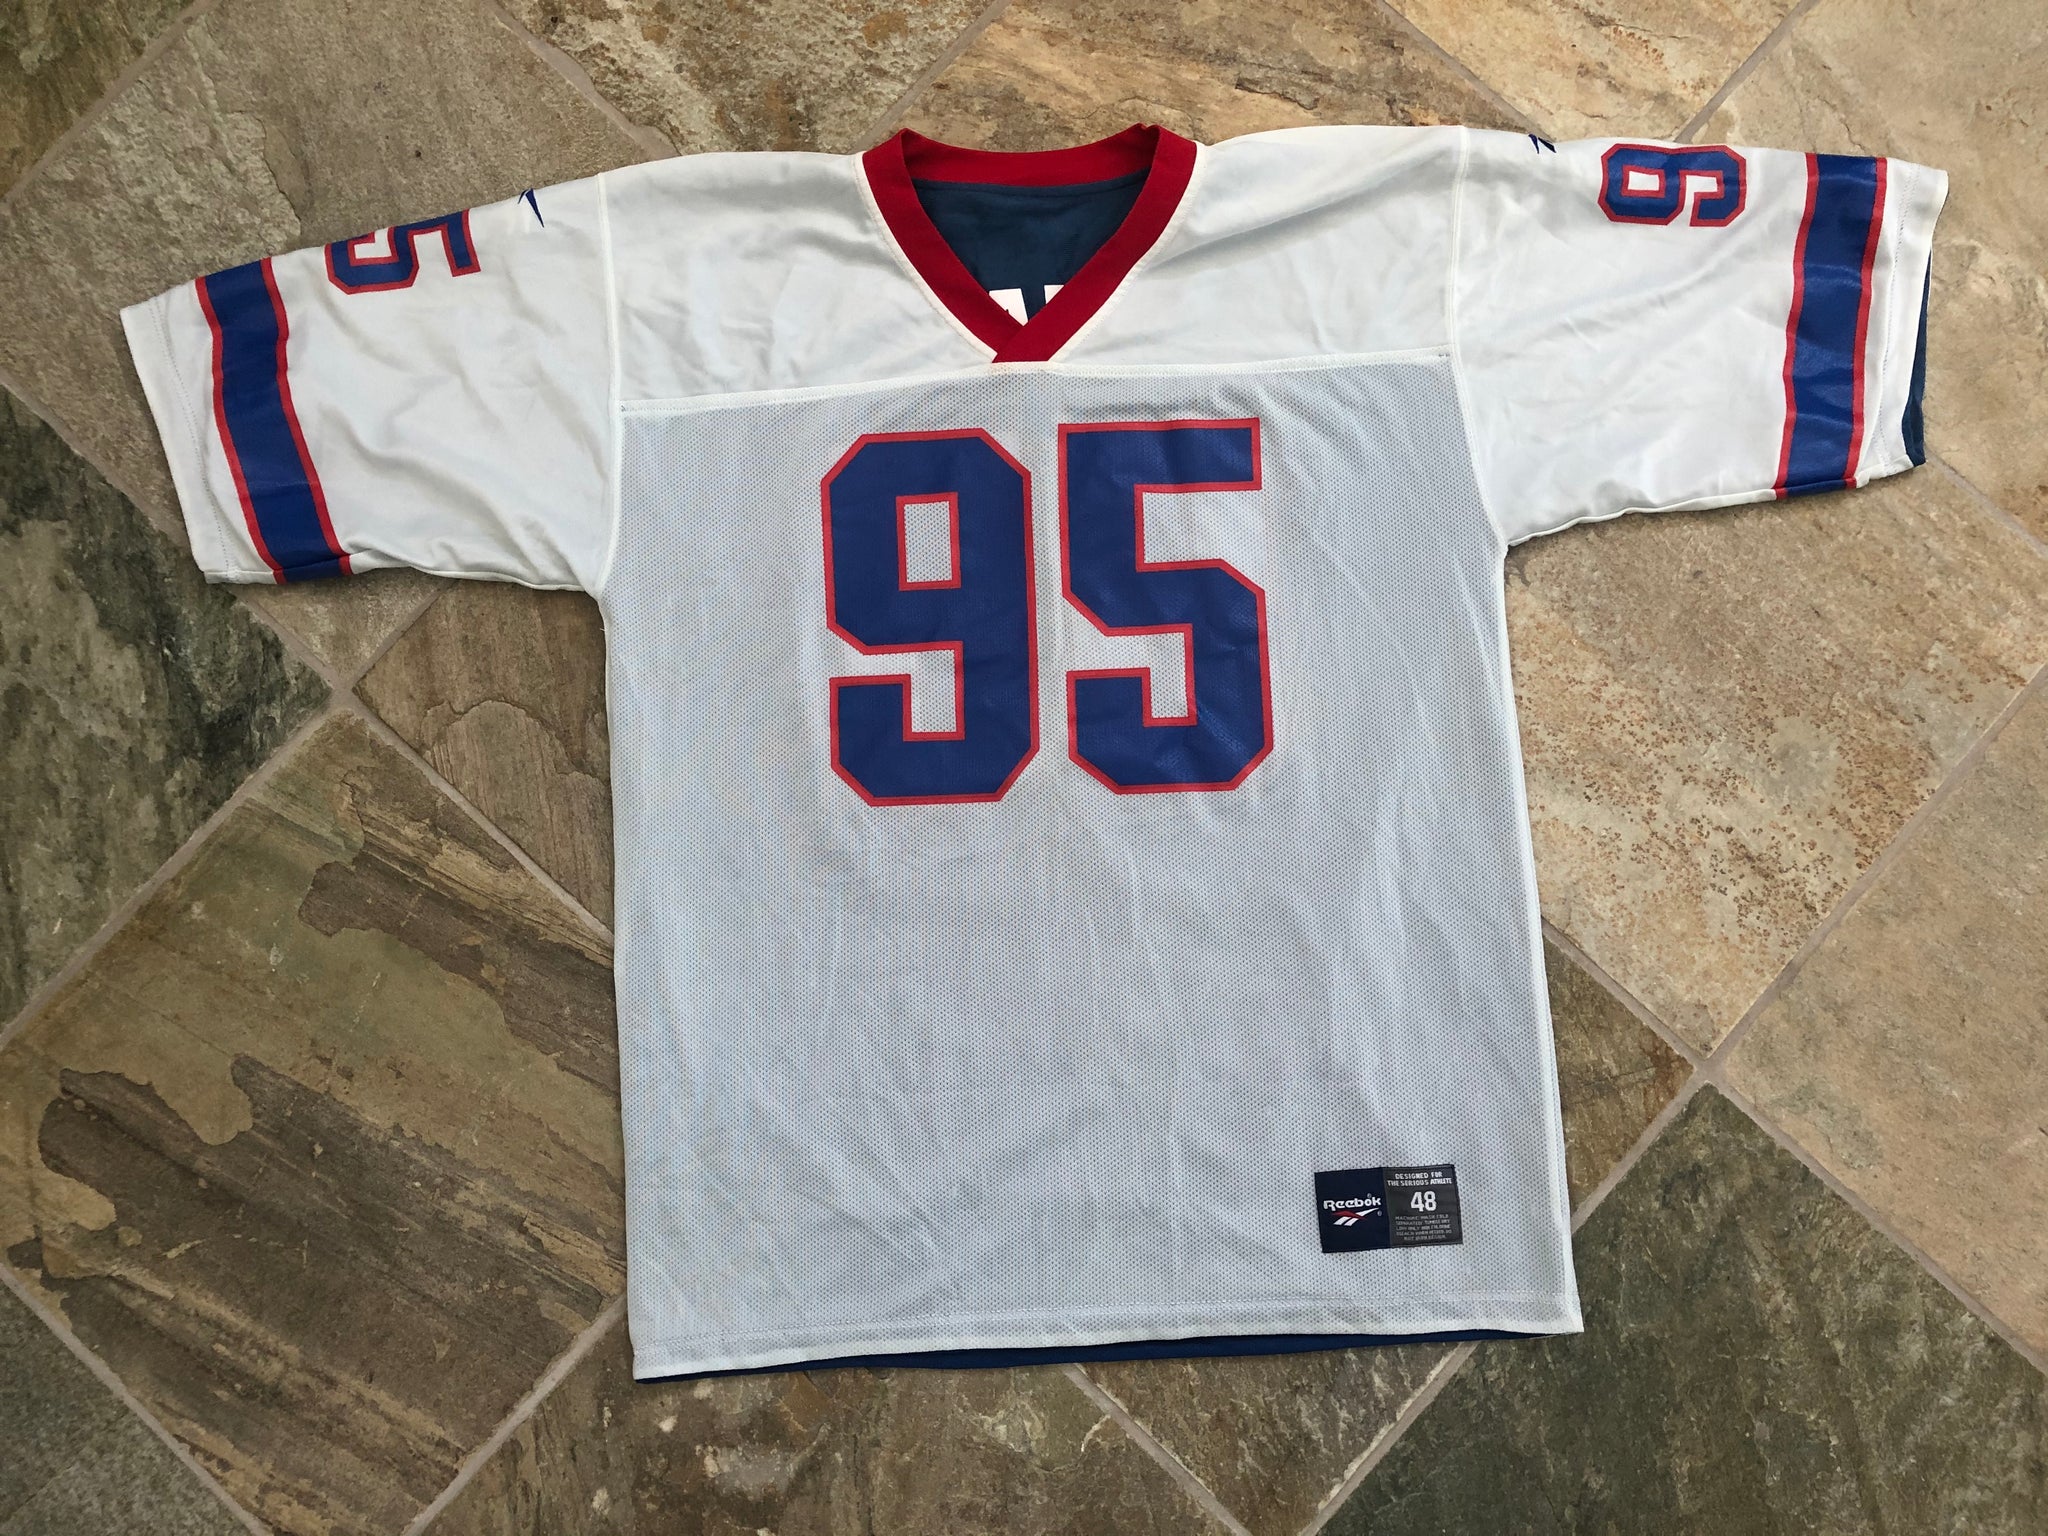 What Size Is A 48 Reebok Football Jersey?